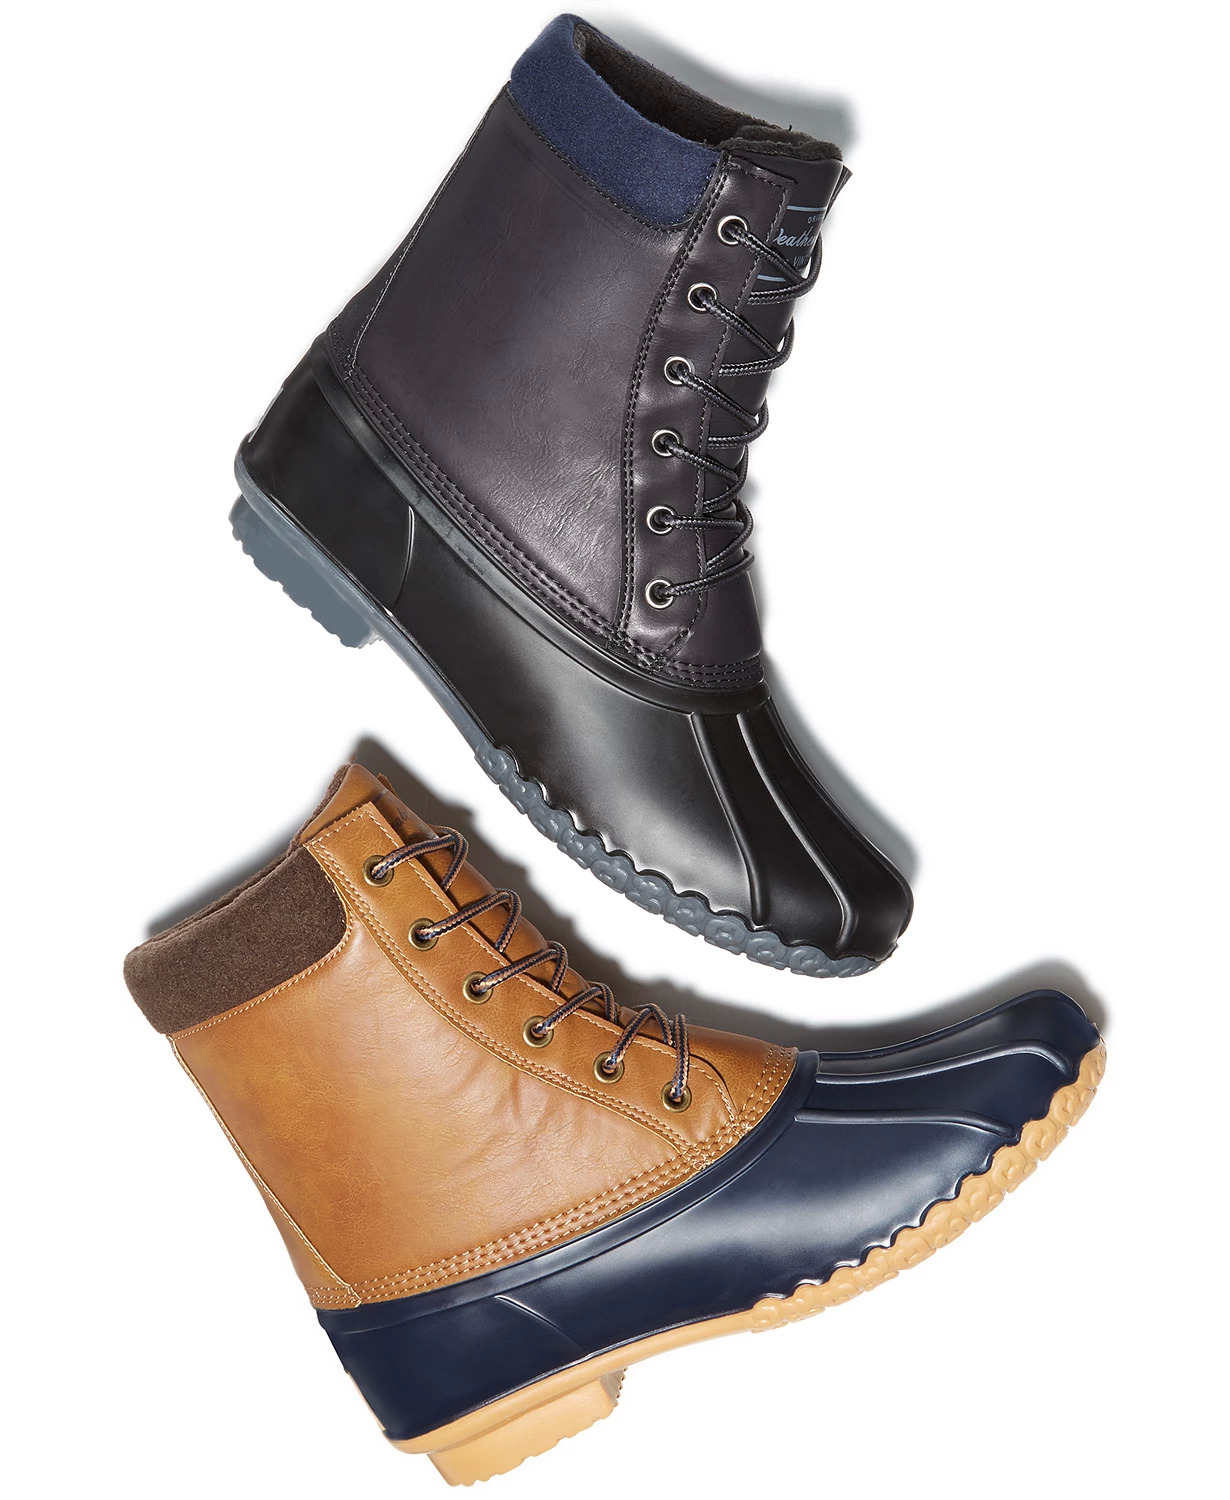 Weatherproof Vintage Men's Adam Duck Boots (various colors) $20 or less w/ SD Cashback + Free Shipping on $25+